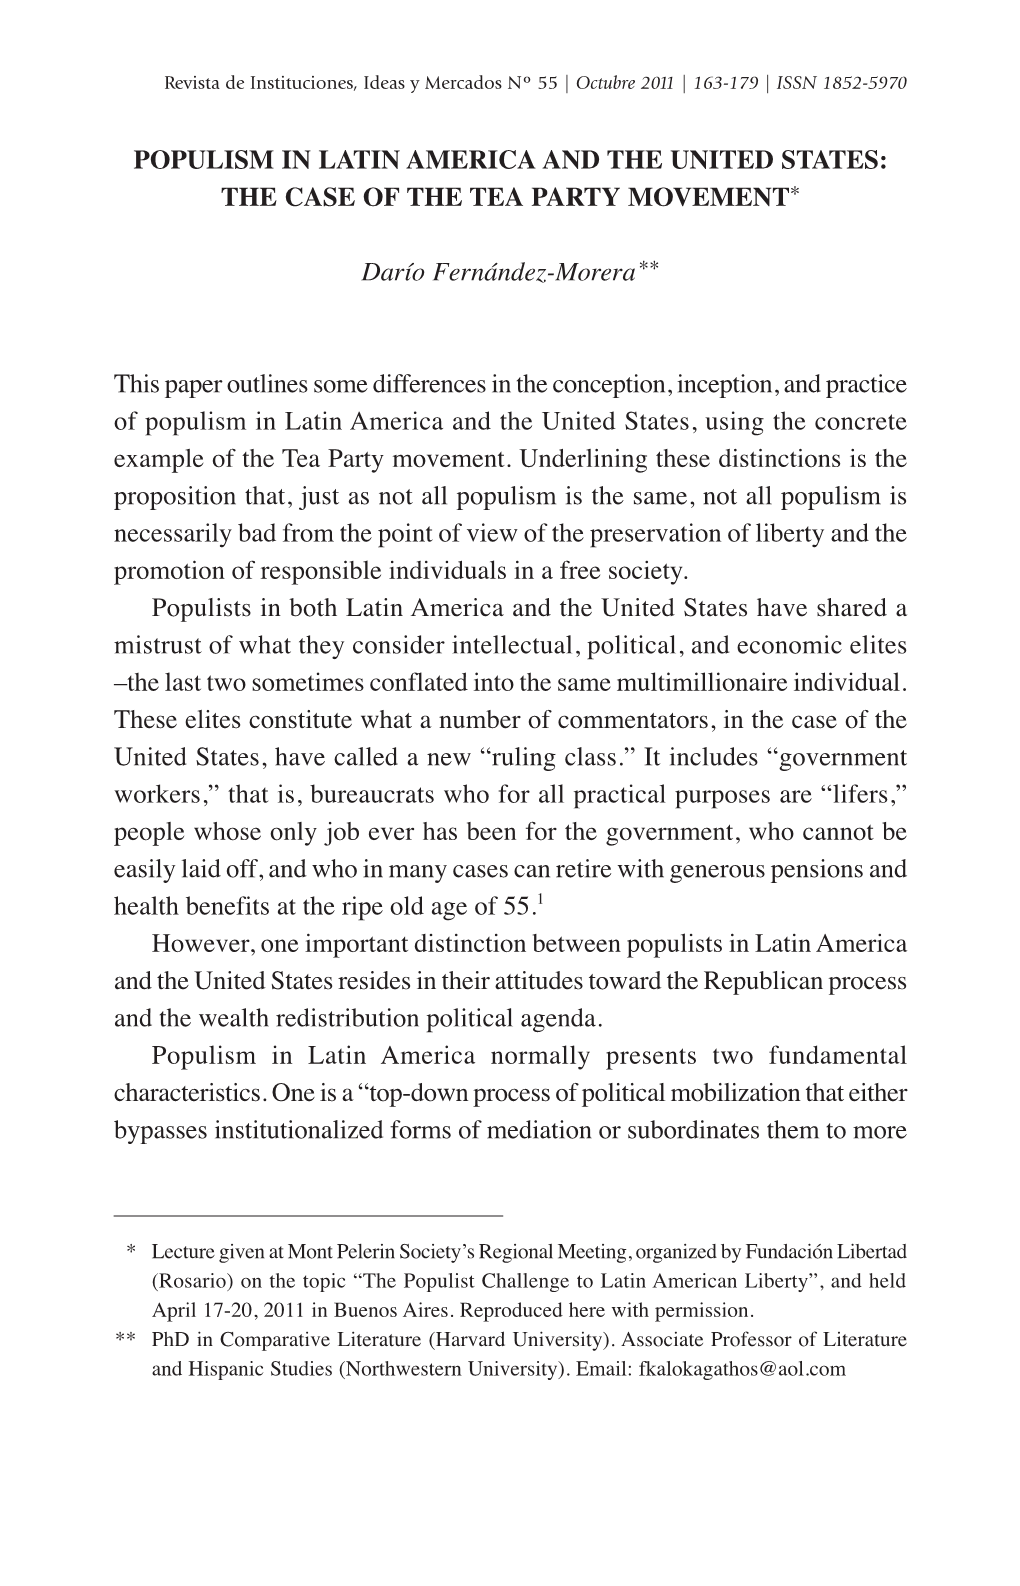 Populism in Latin America and the United States: the Case of the Tea Party Movement*